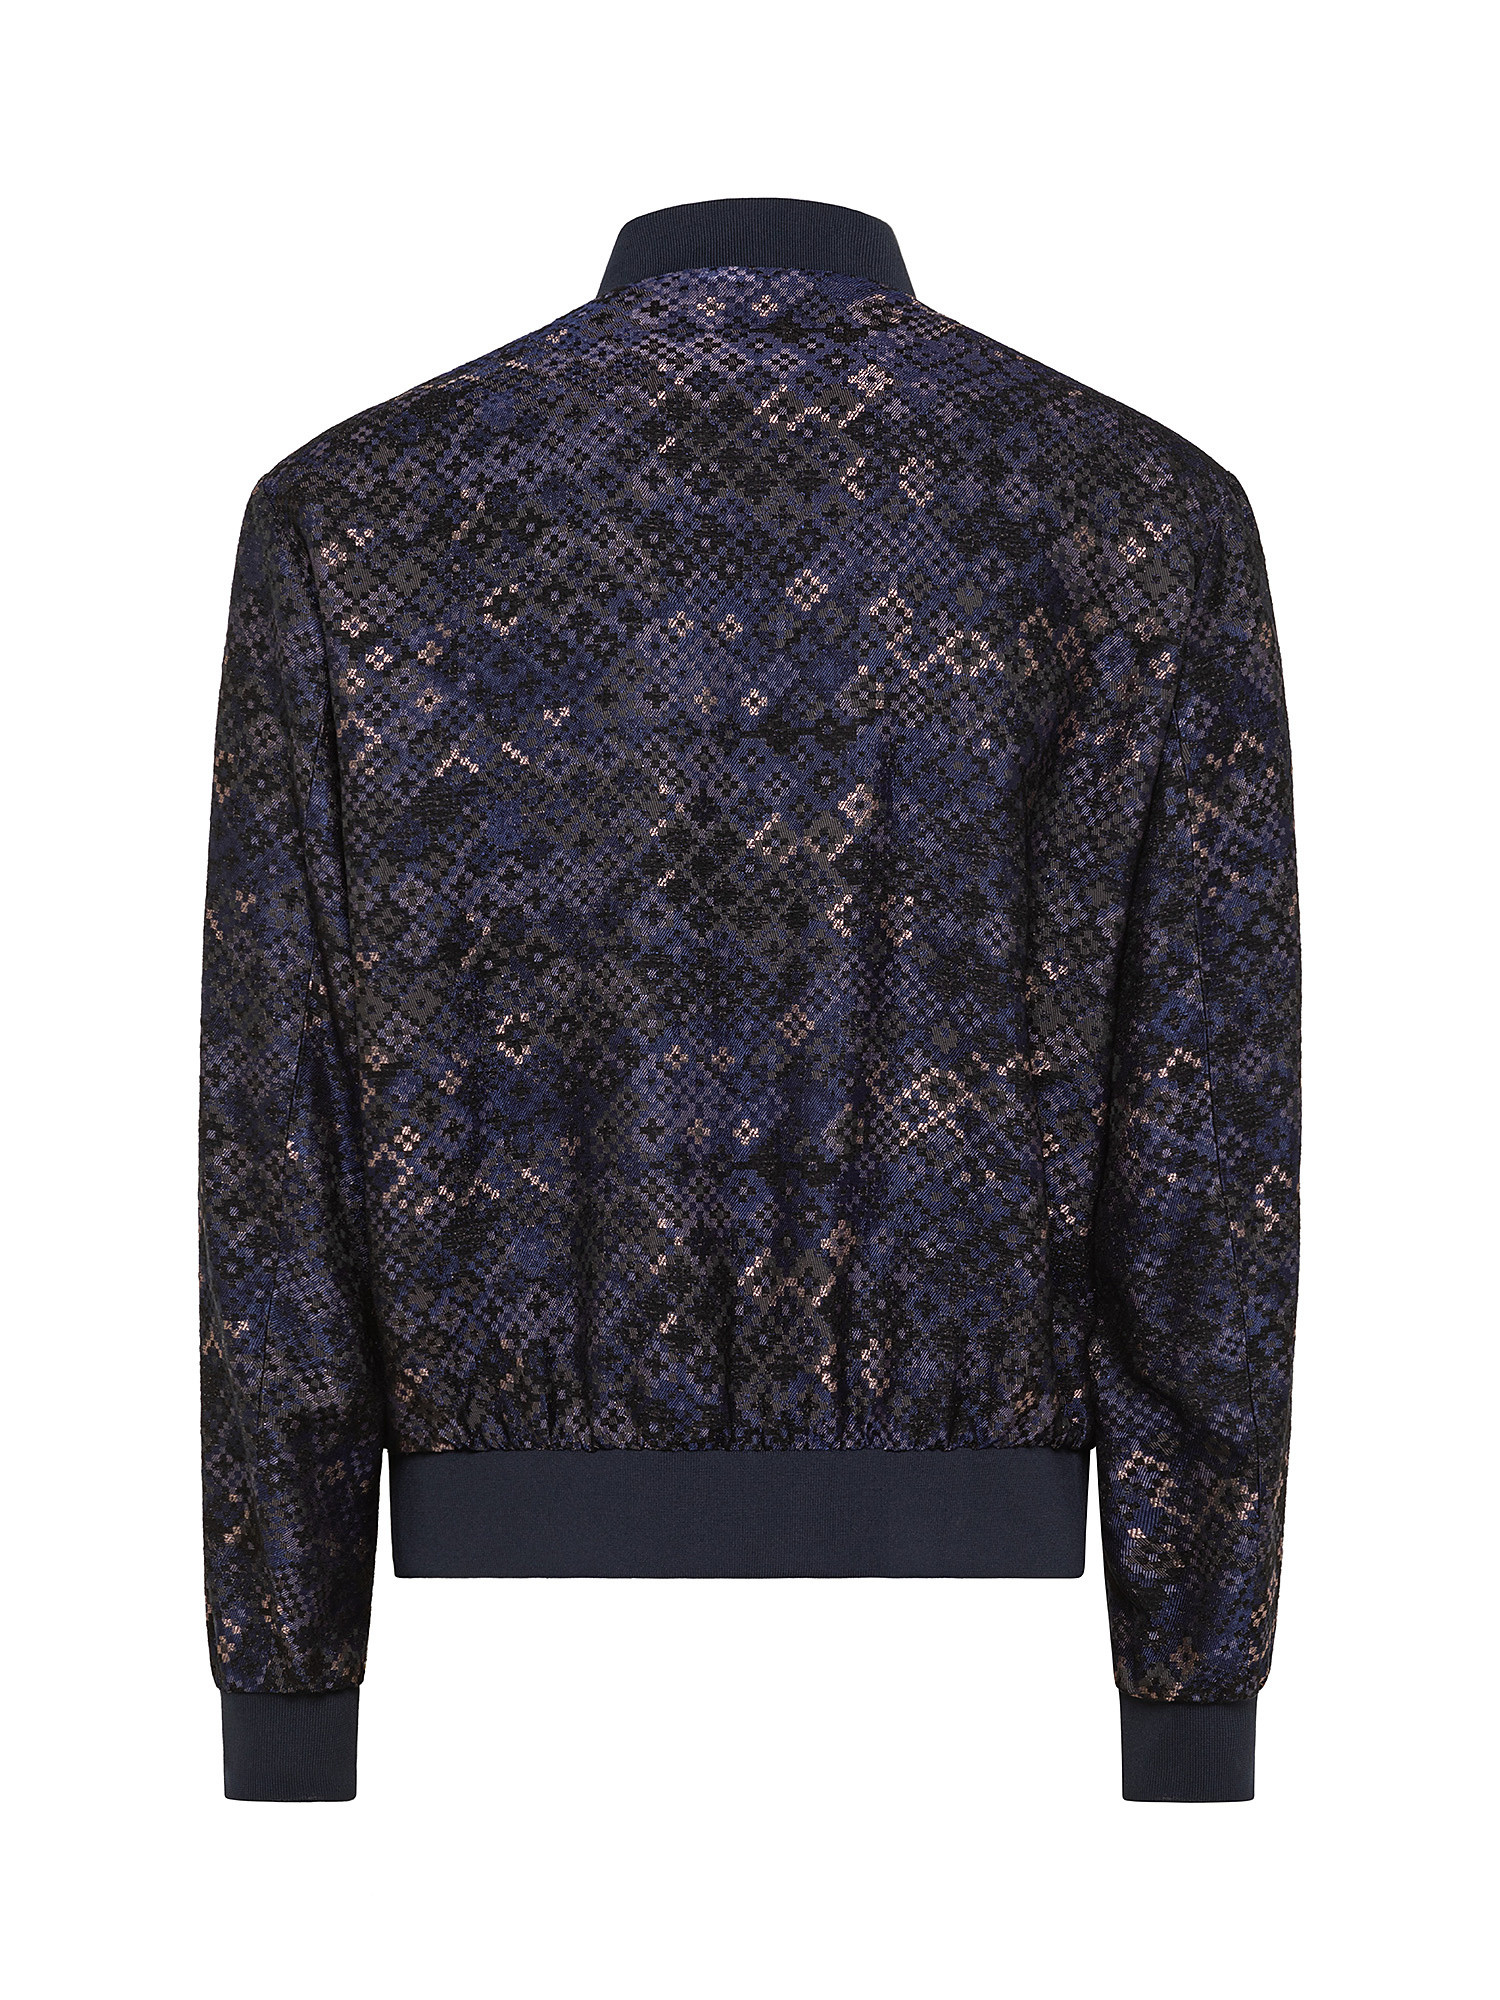 Bomber jacket with all over print, Blue, large image number 1